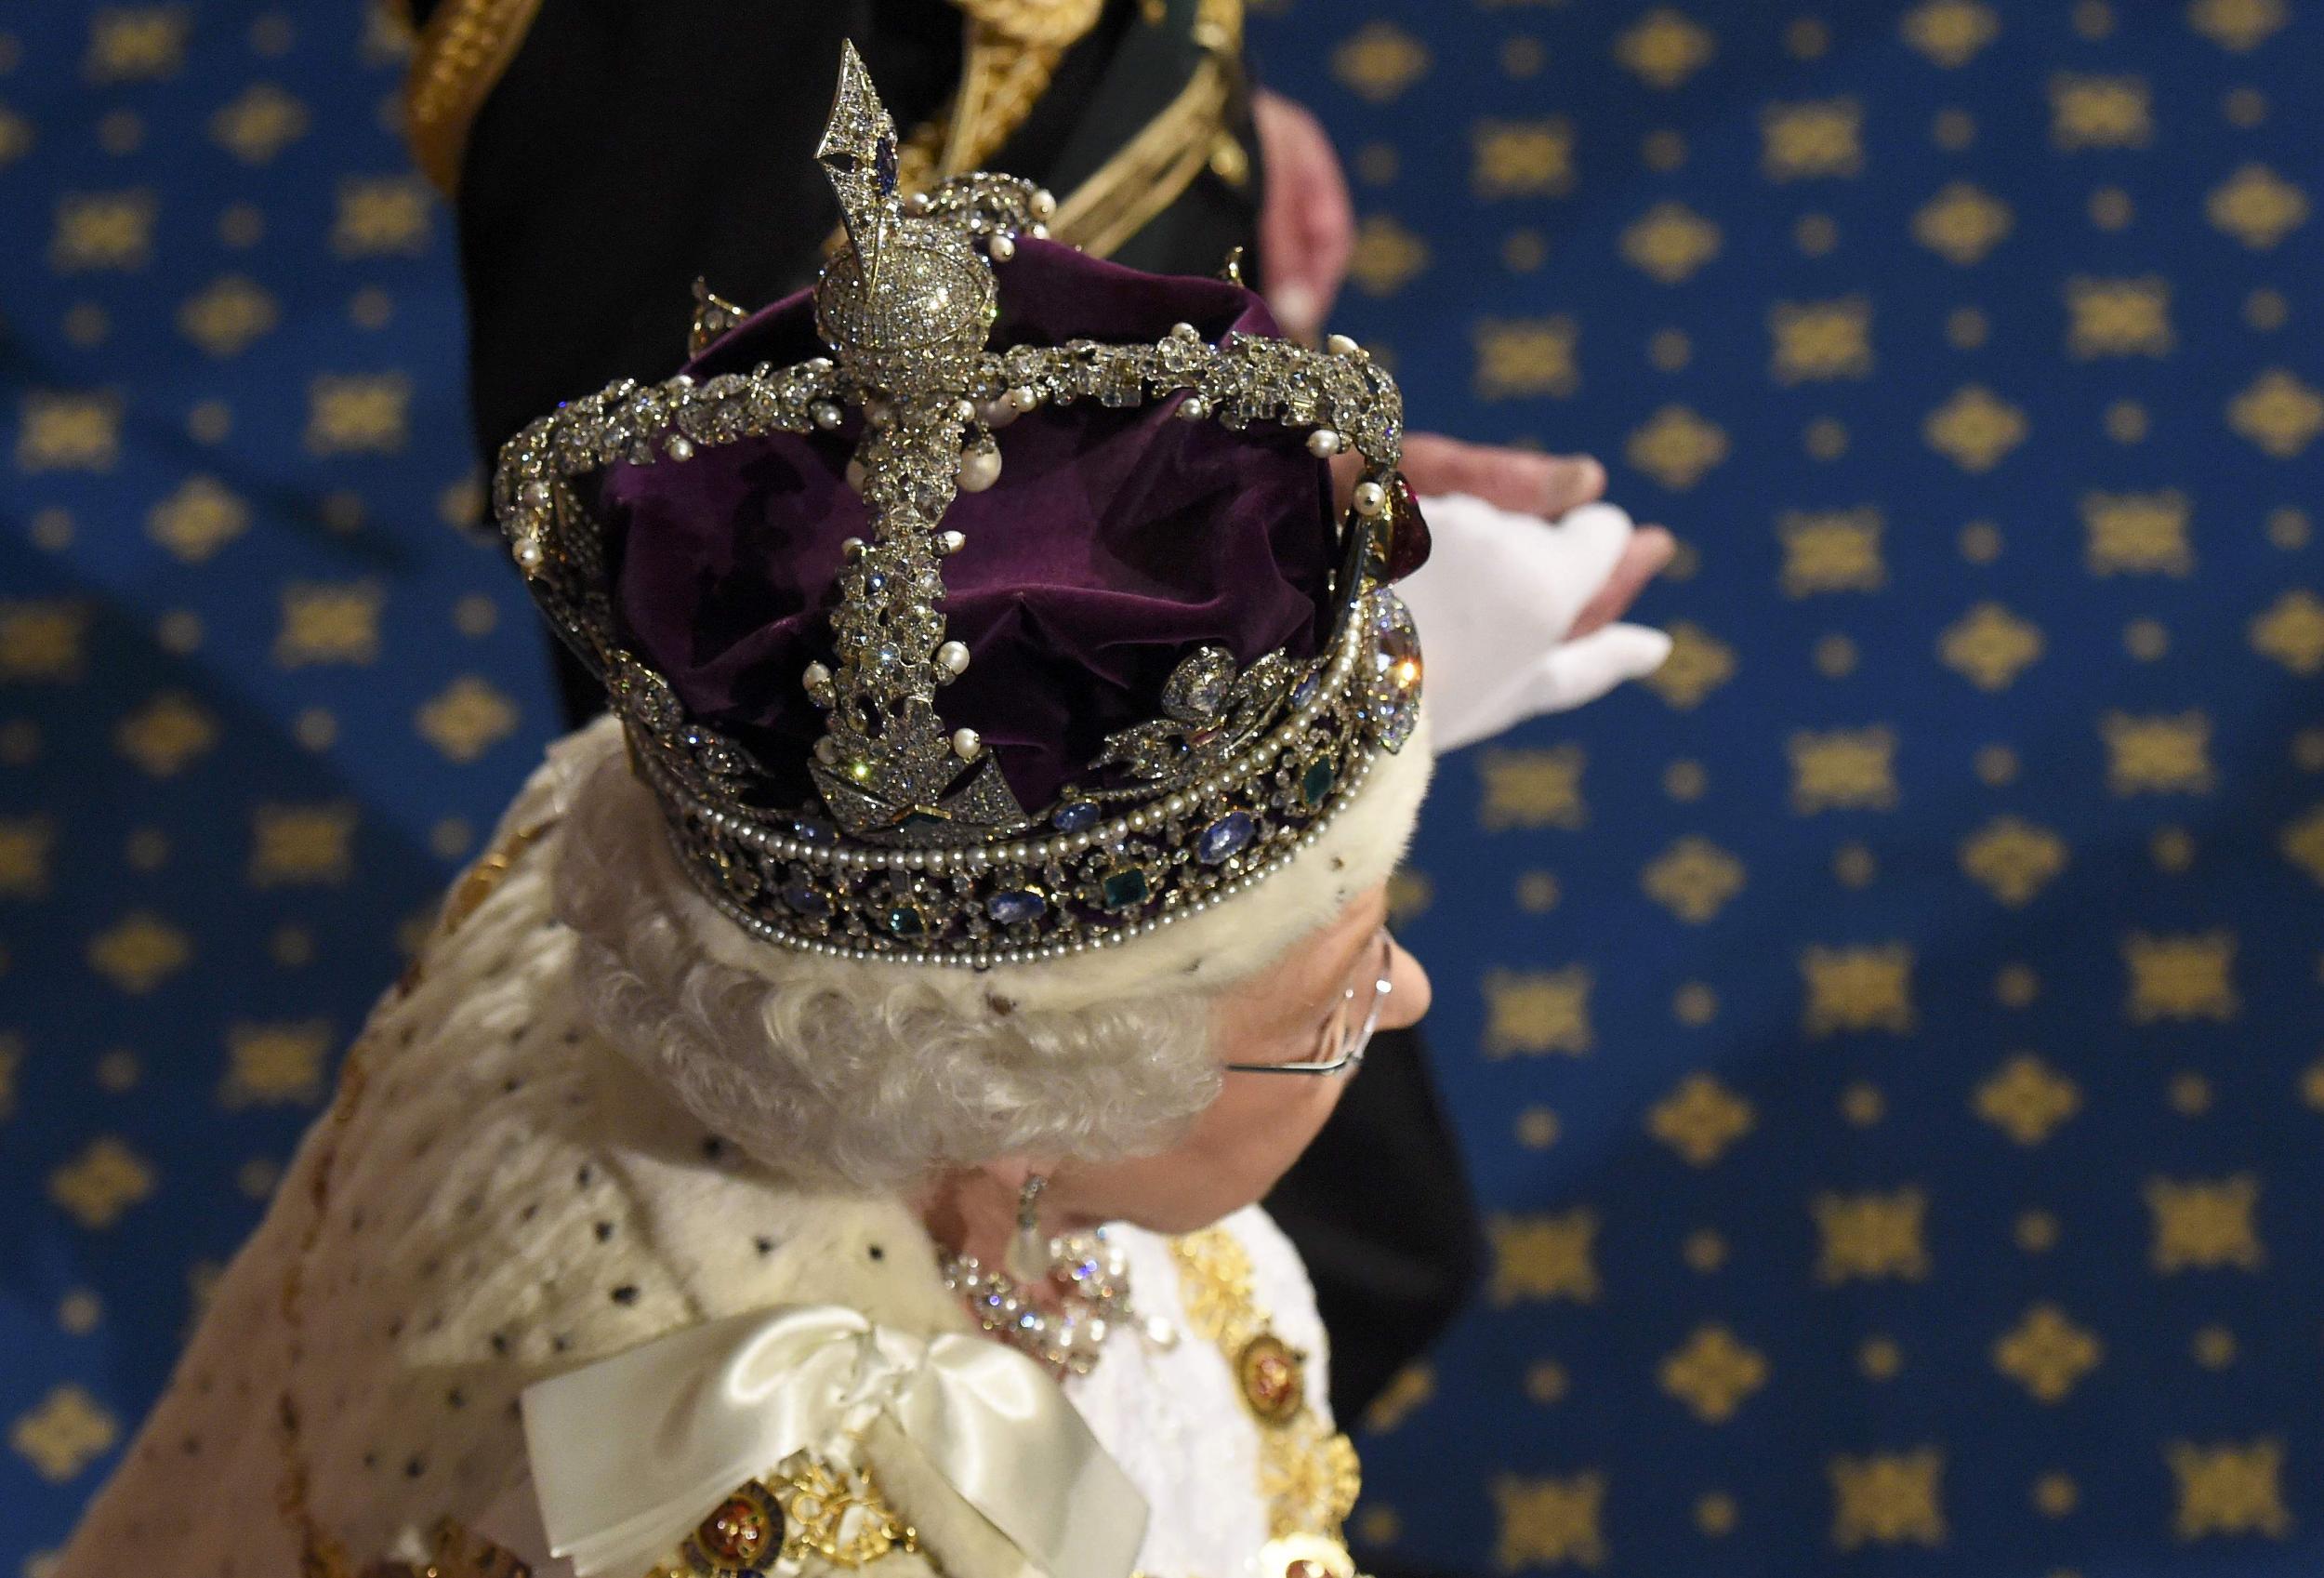 Queen Elizabeth II wears the crown as she proceeds through the Royal Gallery after the state opening of parliament in May 2016